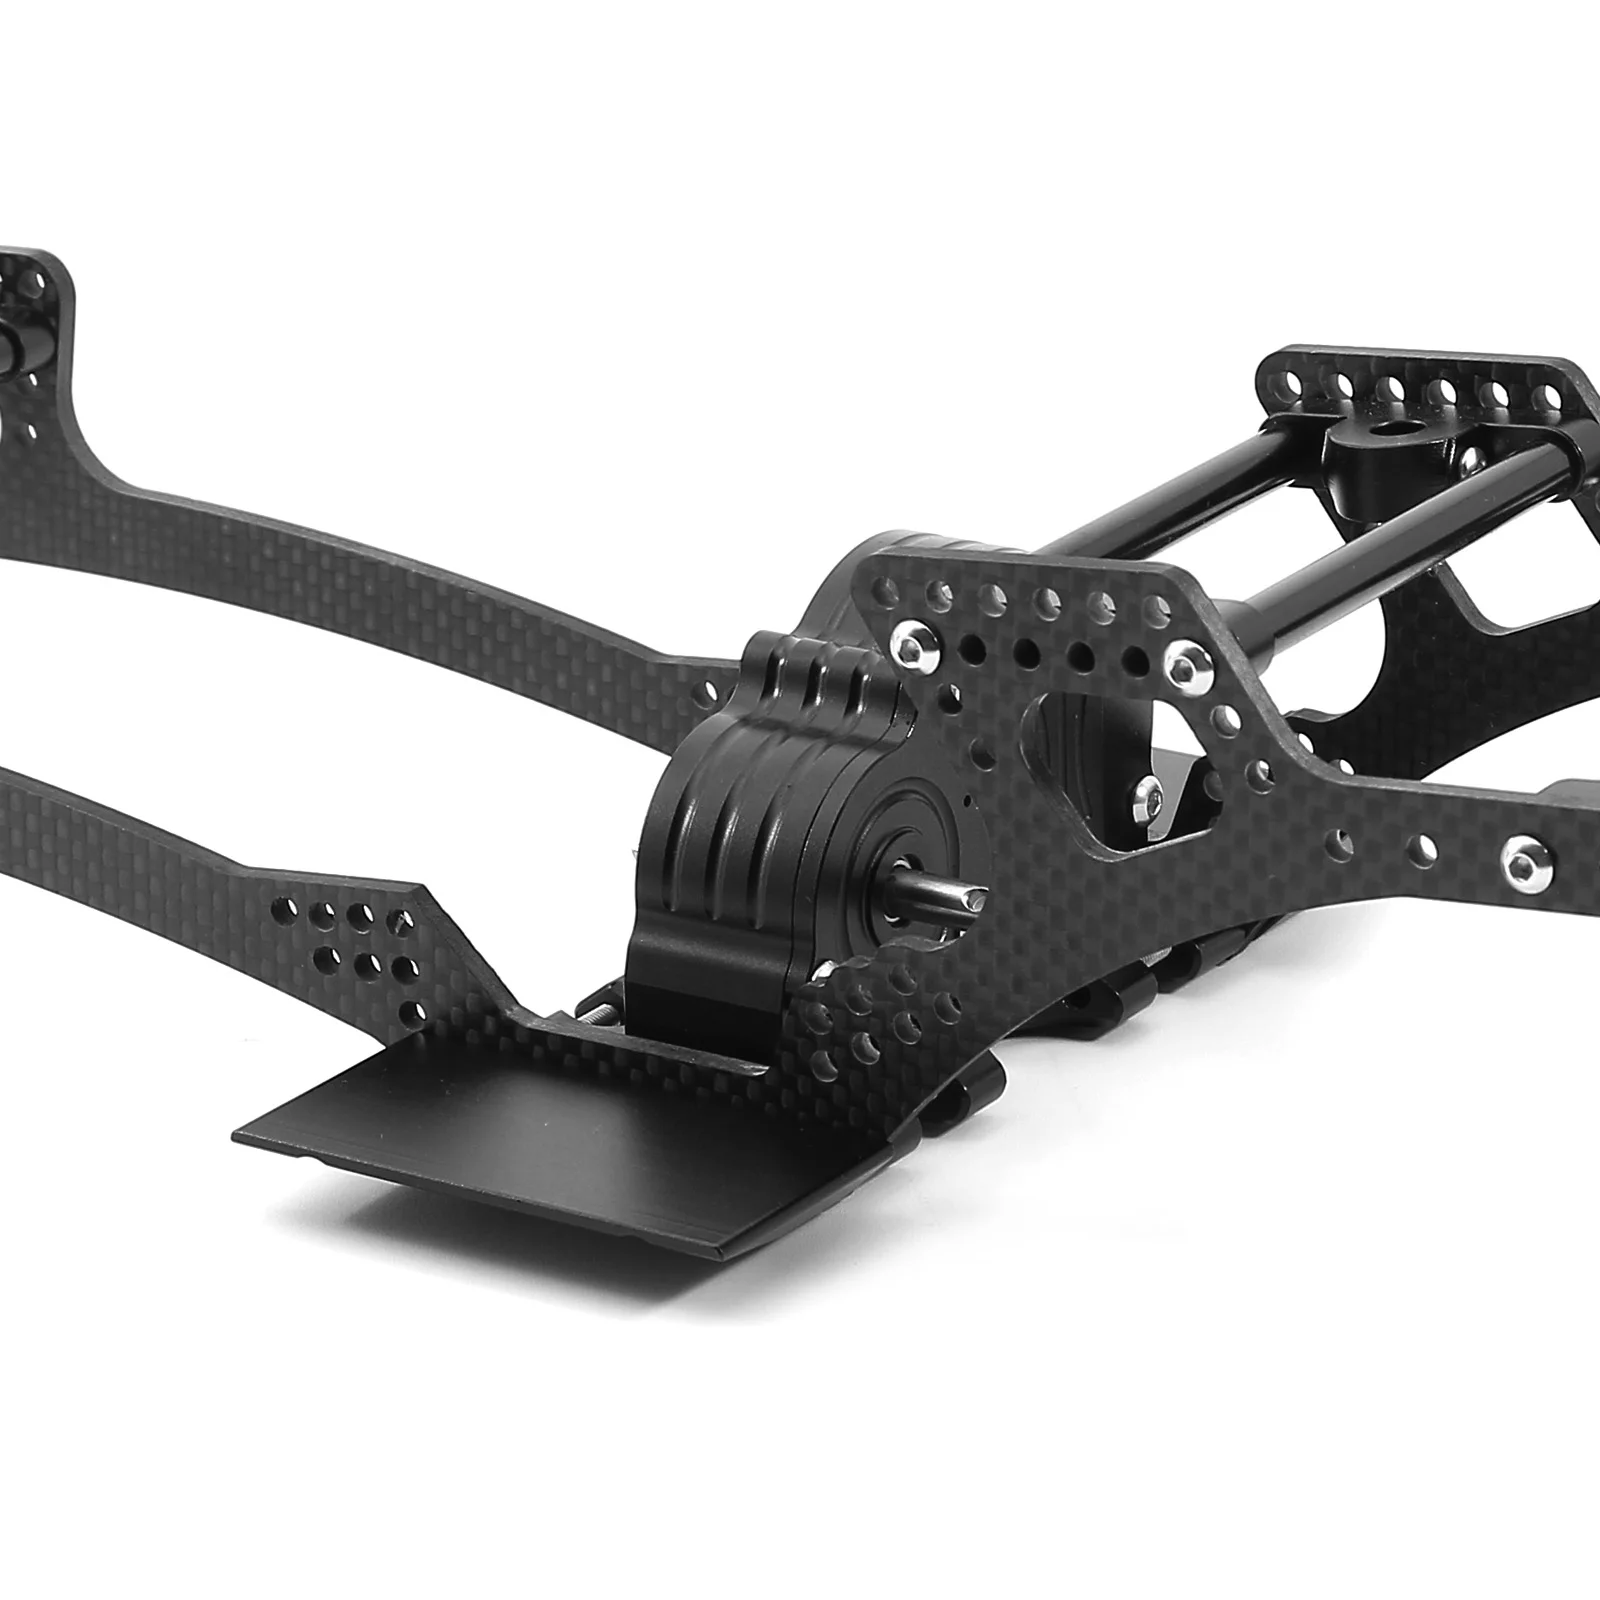 Carbon Fiber LCG Chassis Kit Frame Rail V2 Gearbox Skid Plate Bumper Set for Axial SCX10 1/10 RC Crawler Car DIY Upgrade Parts